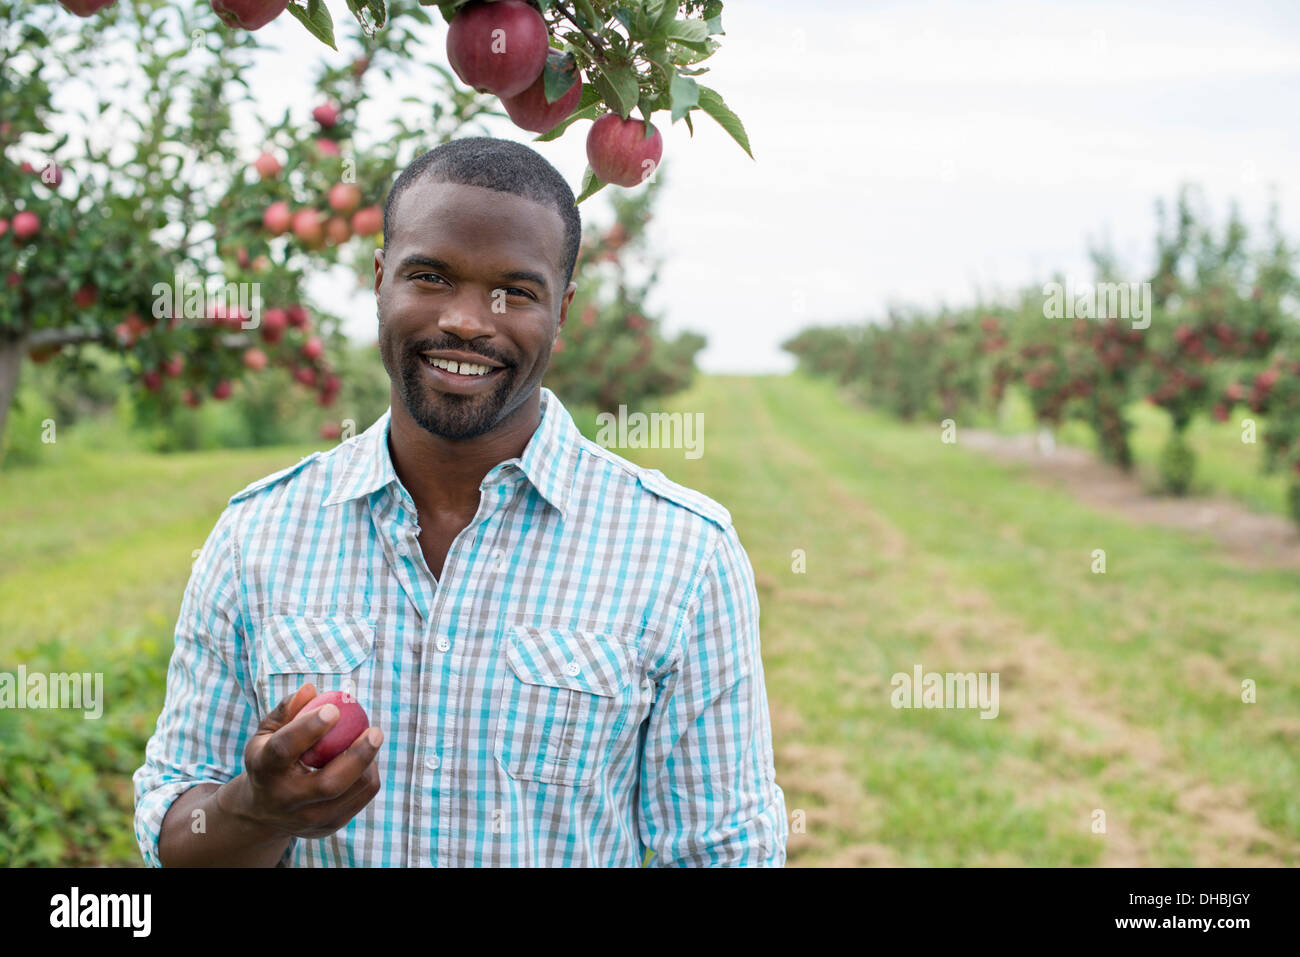 An organic apple tree orchard. A man picking the ripe red apples. Stock Photo